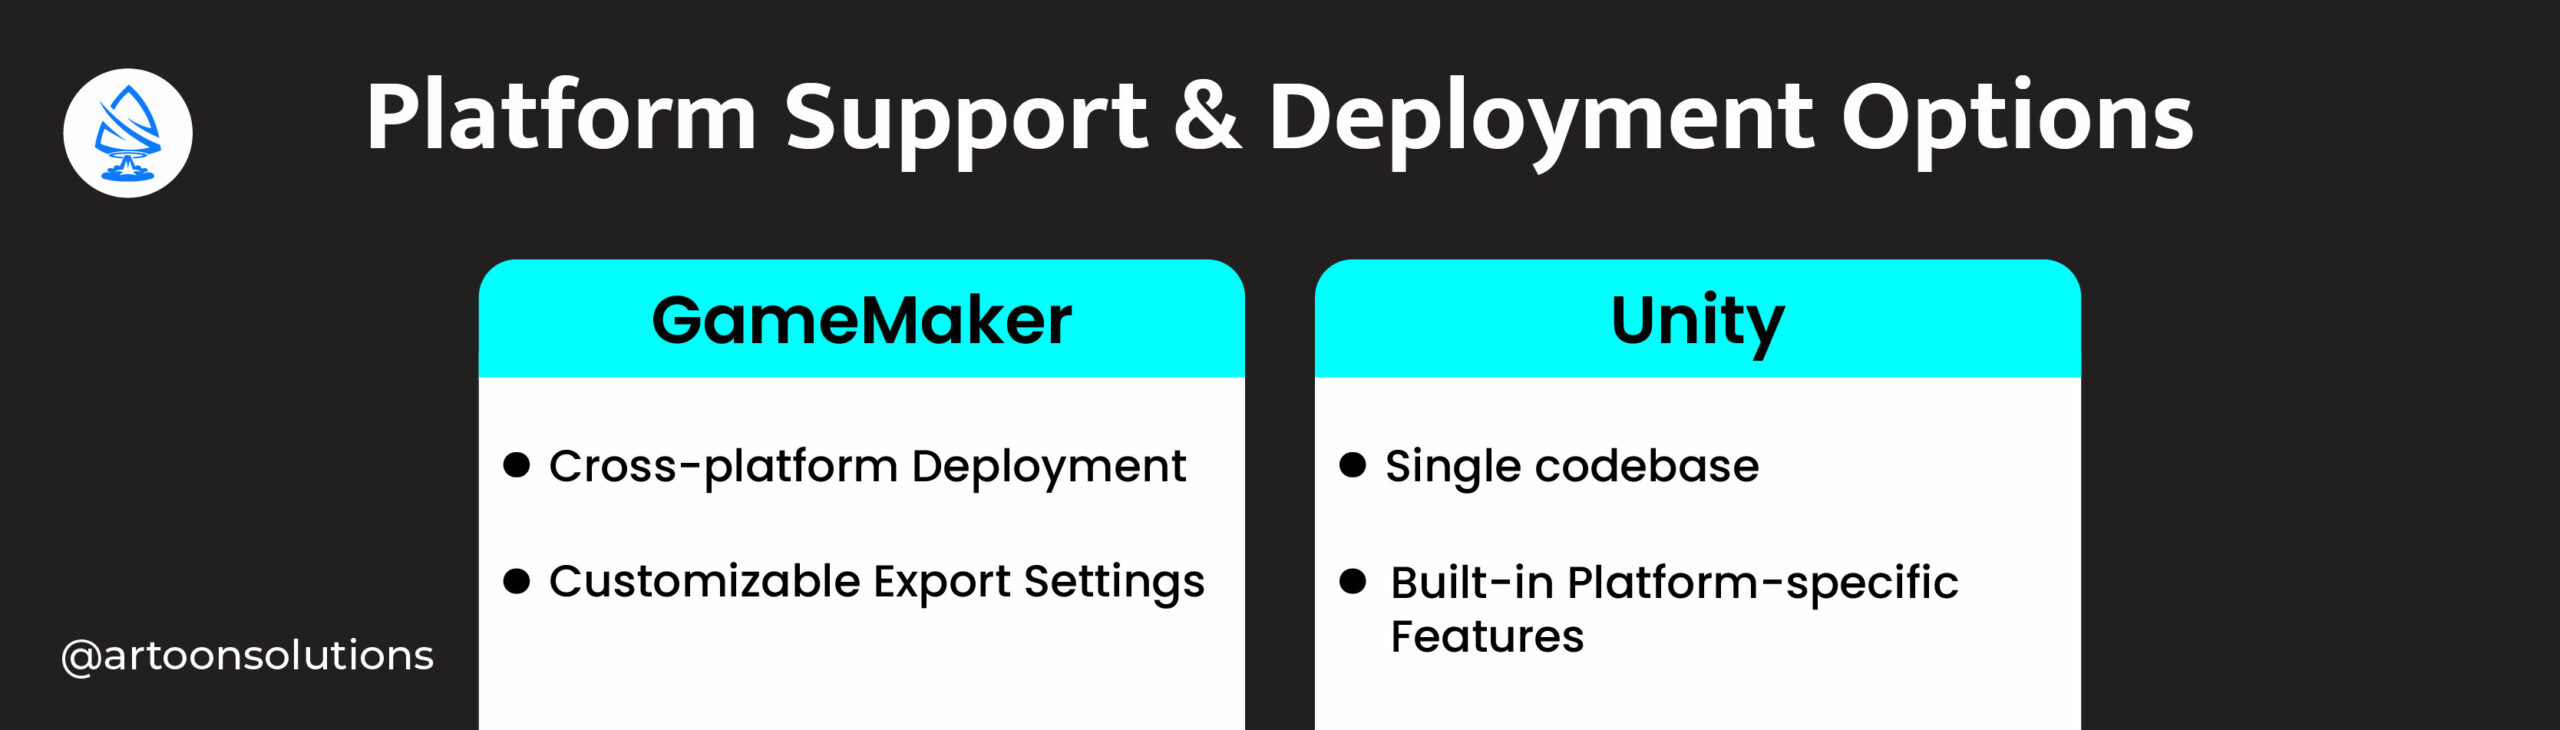 Platform Support and Deployment Options